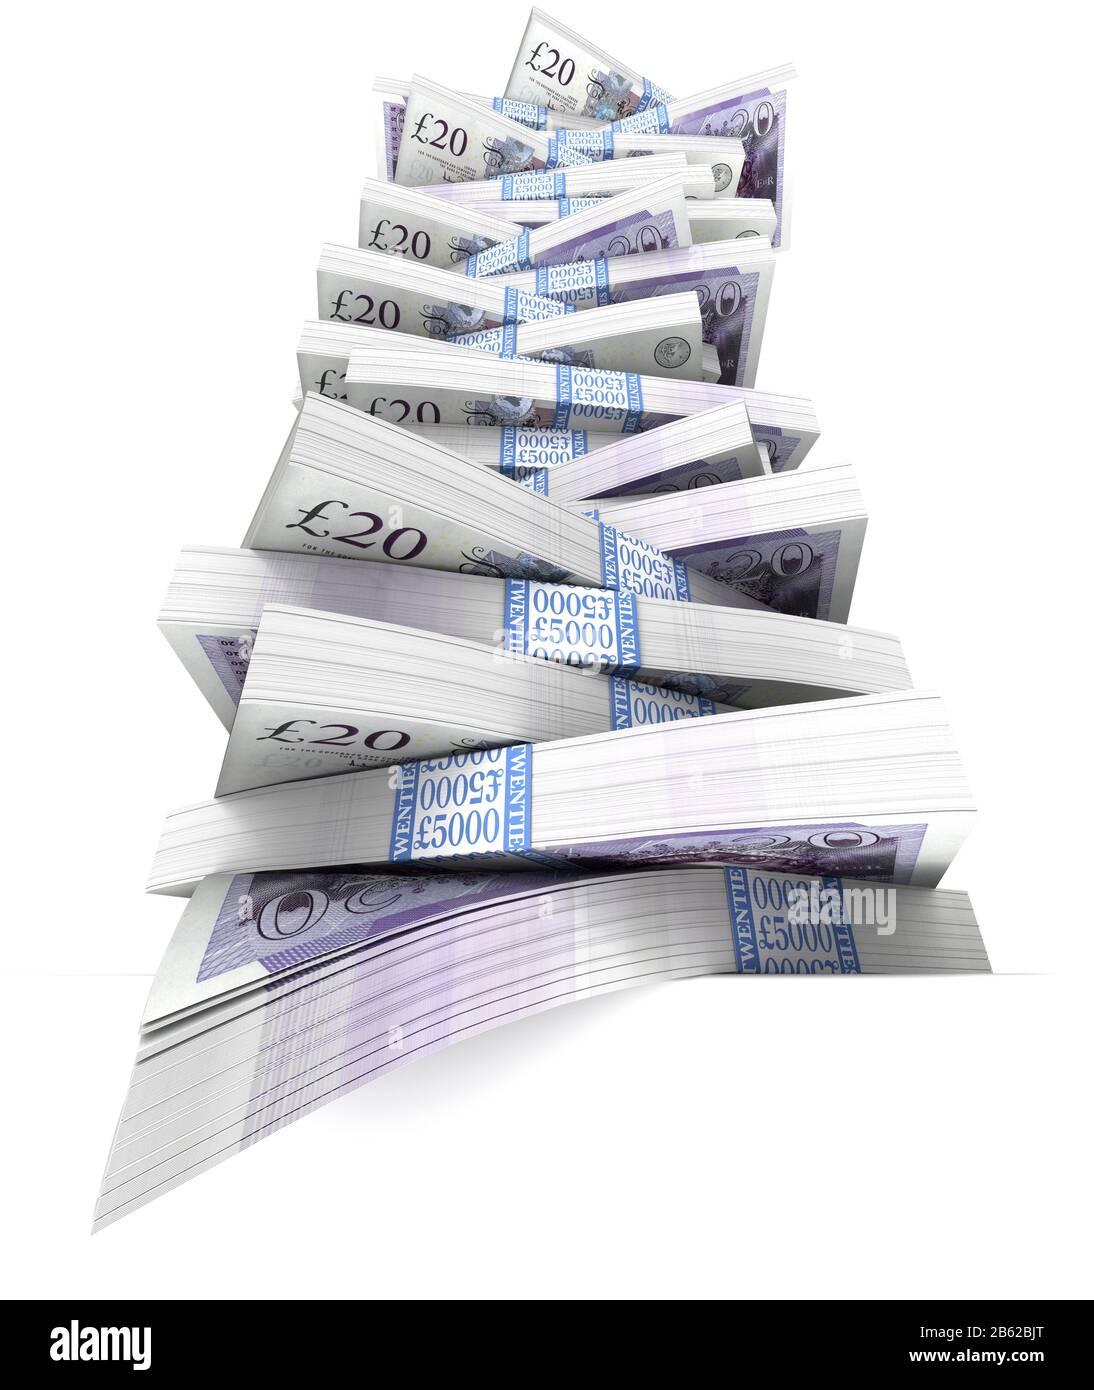 Pound note stack of money. Wealth. Cash. 20 pounds sterling UK banknotes, white background. Low viewpoint. Debt. Finance. Stock Photo